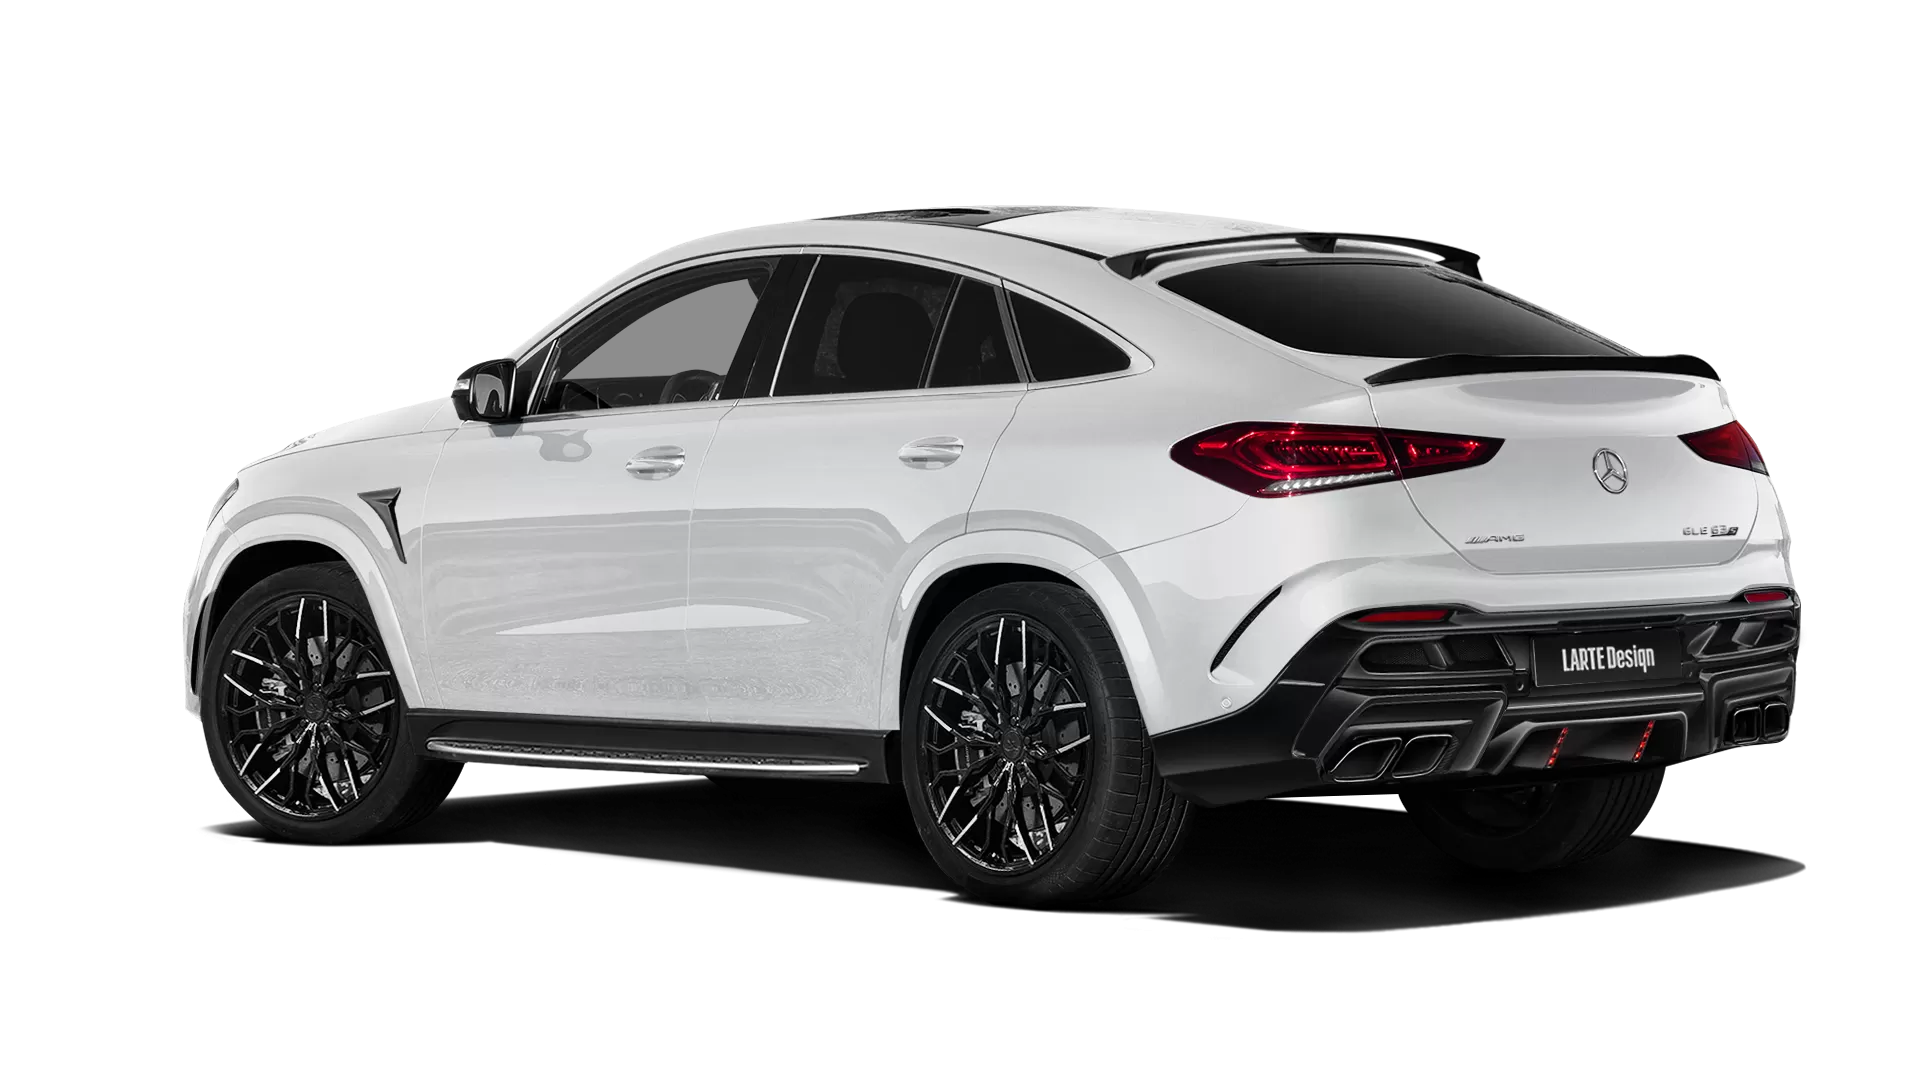 Mercedes GLE Coupe AMG 63 C167 with painted body kit: rear view shown in Polar White